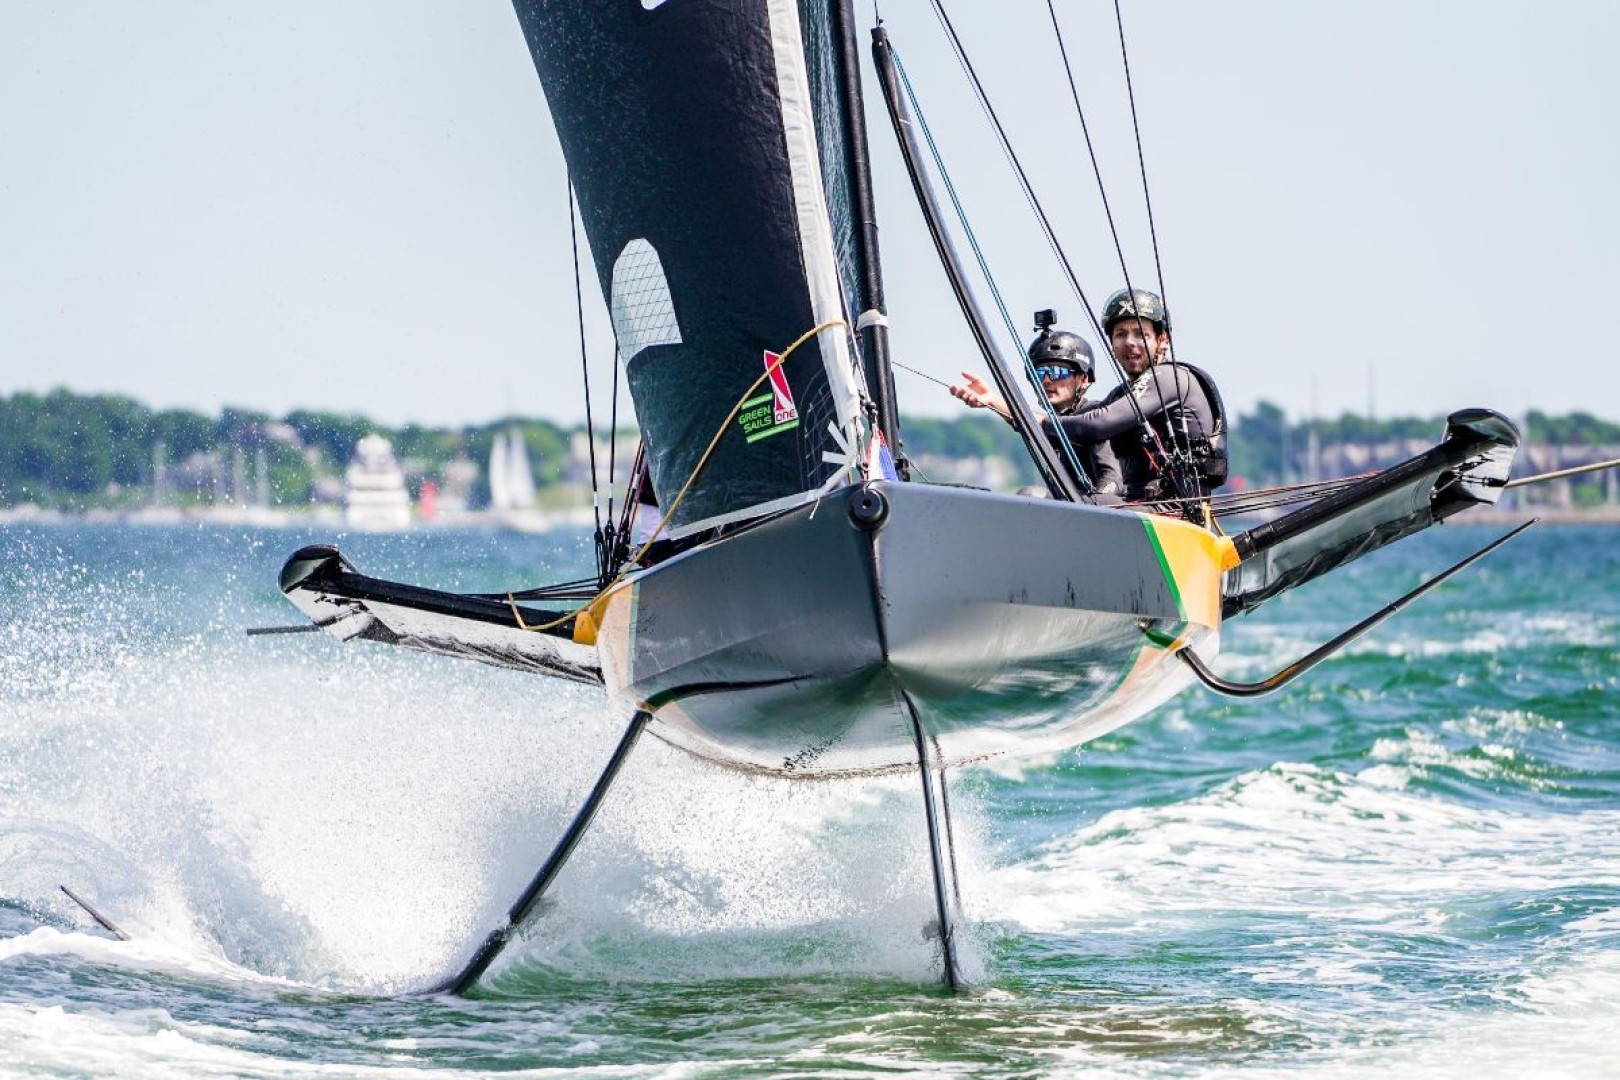 69F sailing goes to 2022 Race Week at Newport presented by Rolex